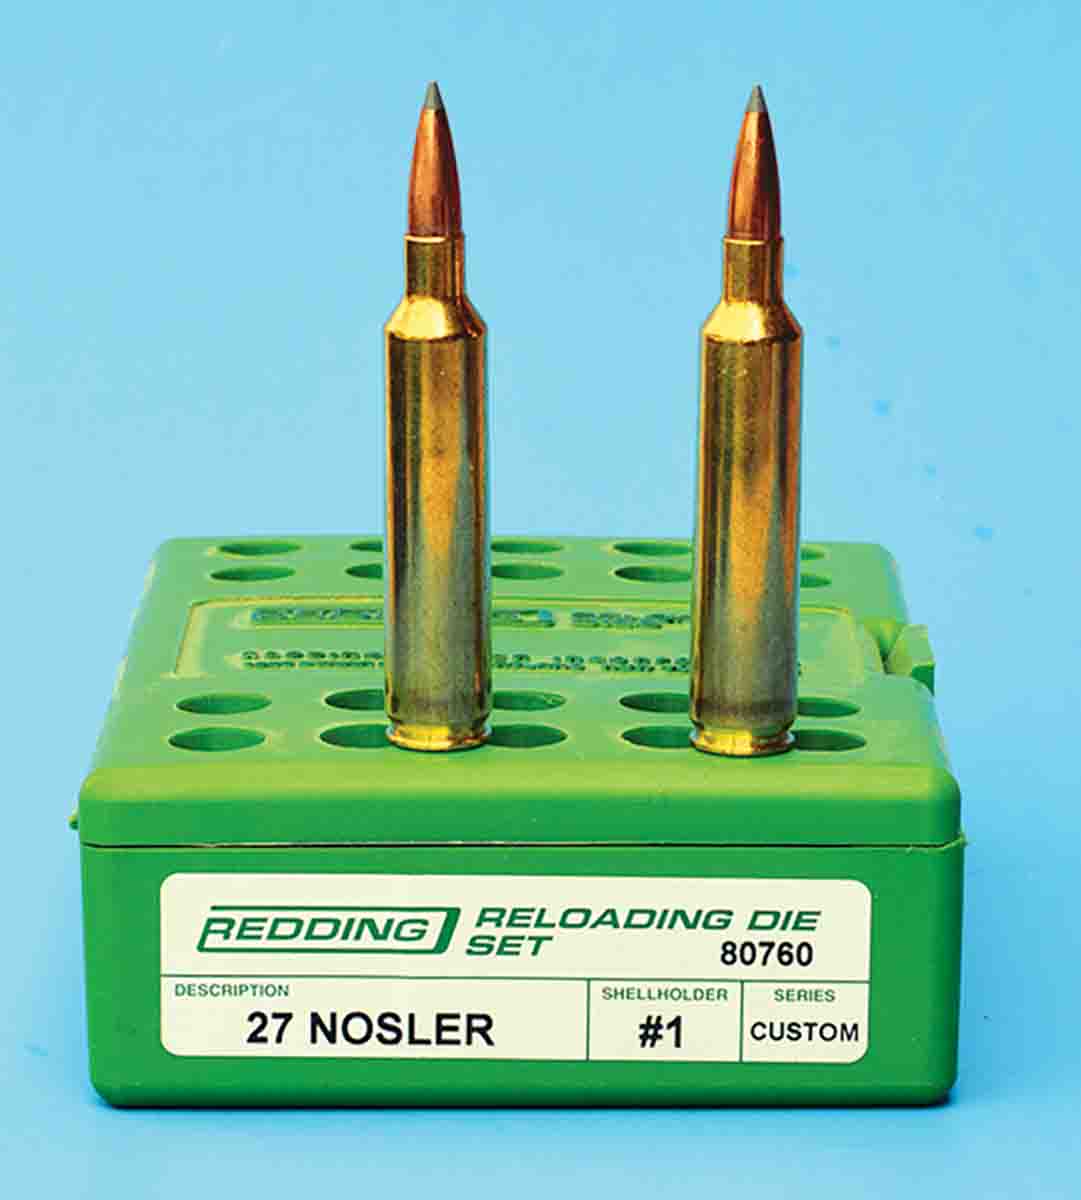 The .27 Nosler is an impressive cartridge that utilizes heavyweight, high BC, low-drag .277-inch bullets. A skilled handloader can duplicate or exceed factory load performance.